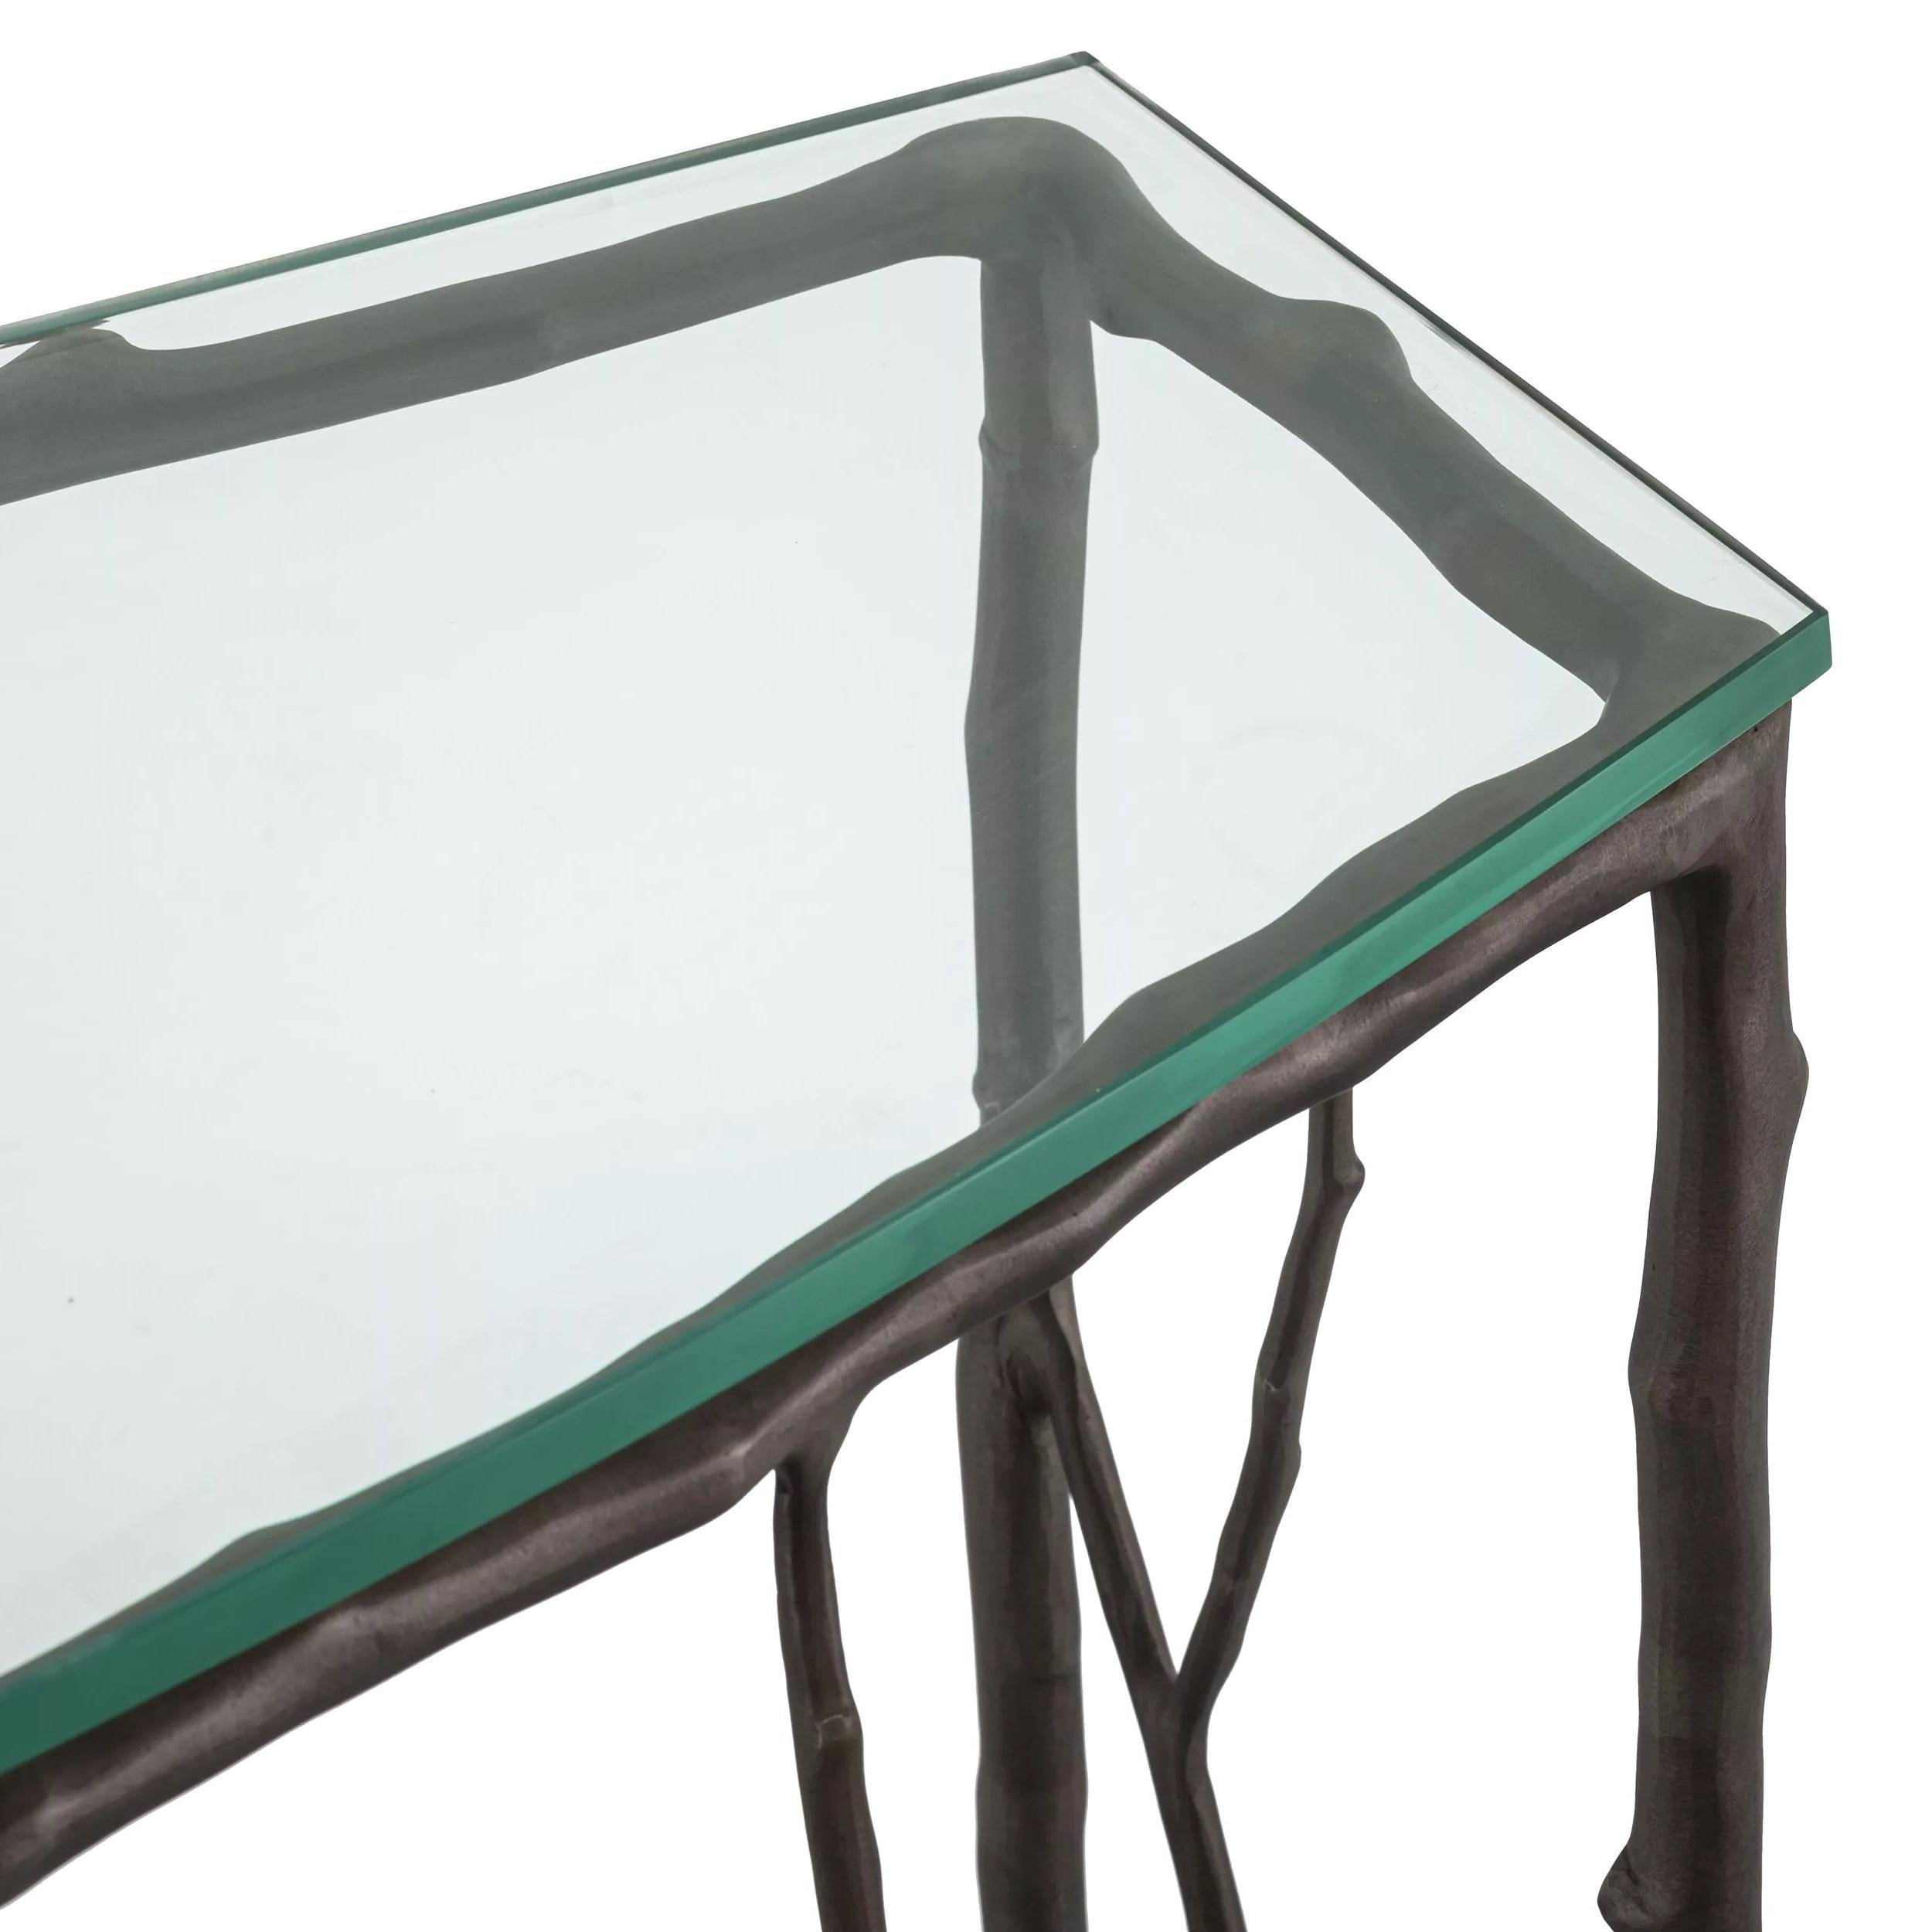 Organic Design And Giacometti Style Aluminum Bronze Finish Metal Structure And Clear Glass Top (0.39' thick) Console Table.